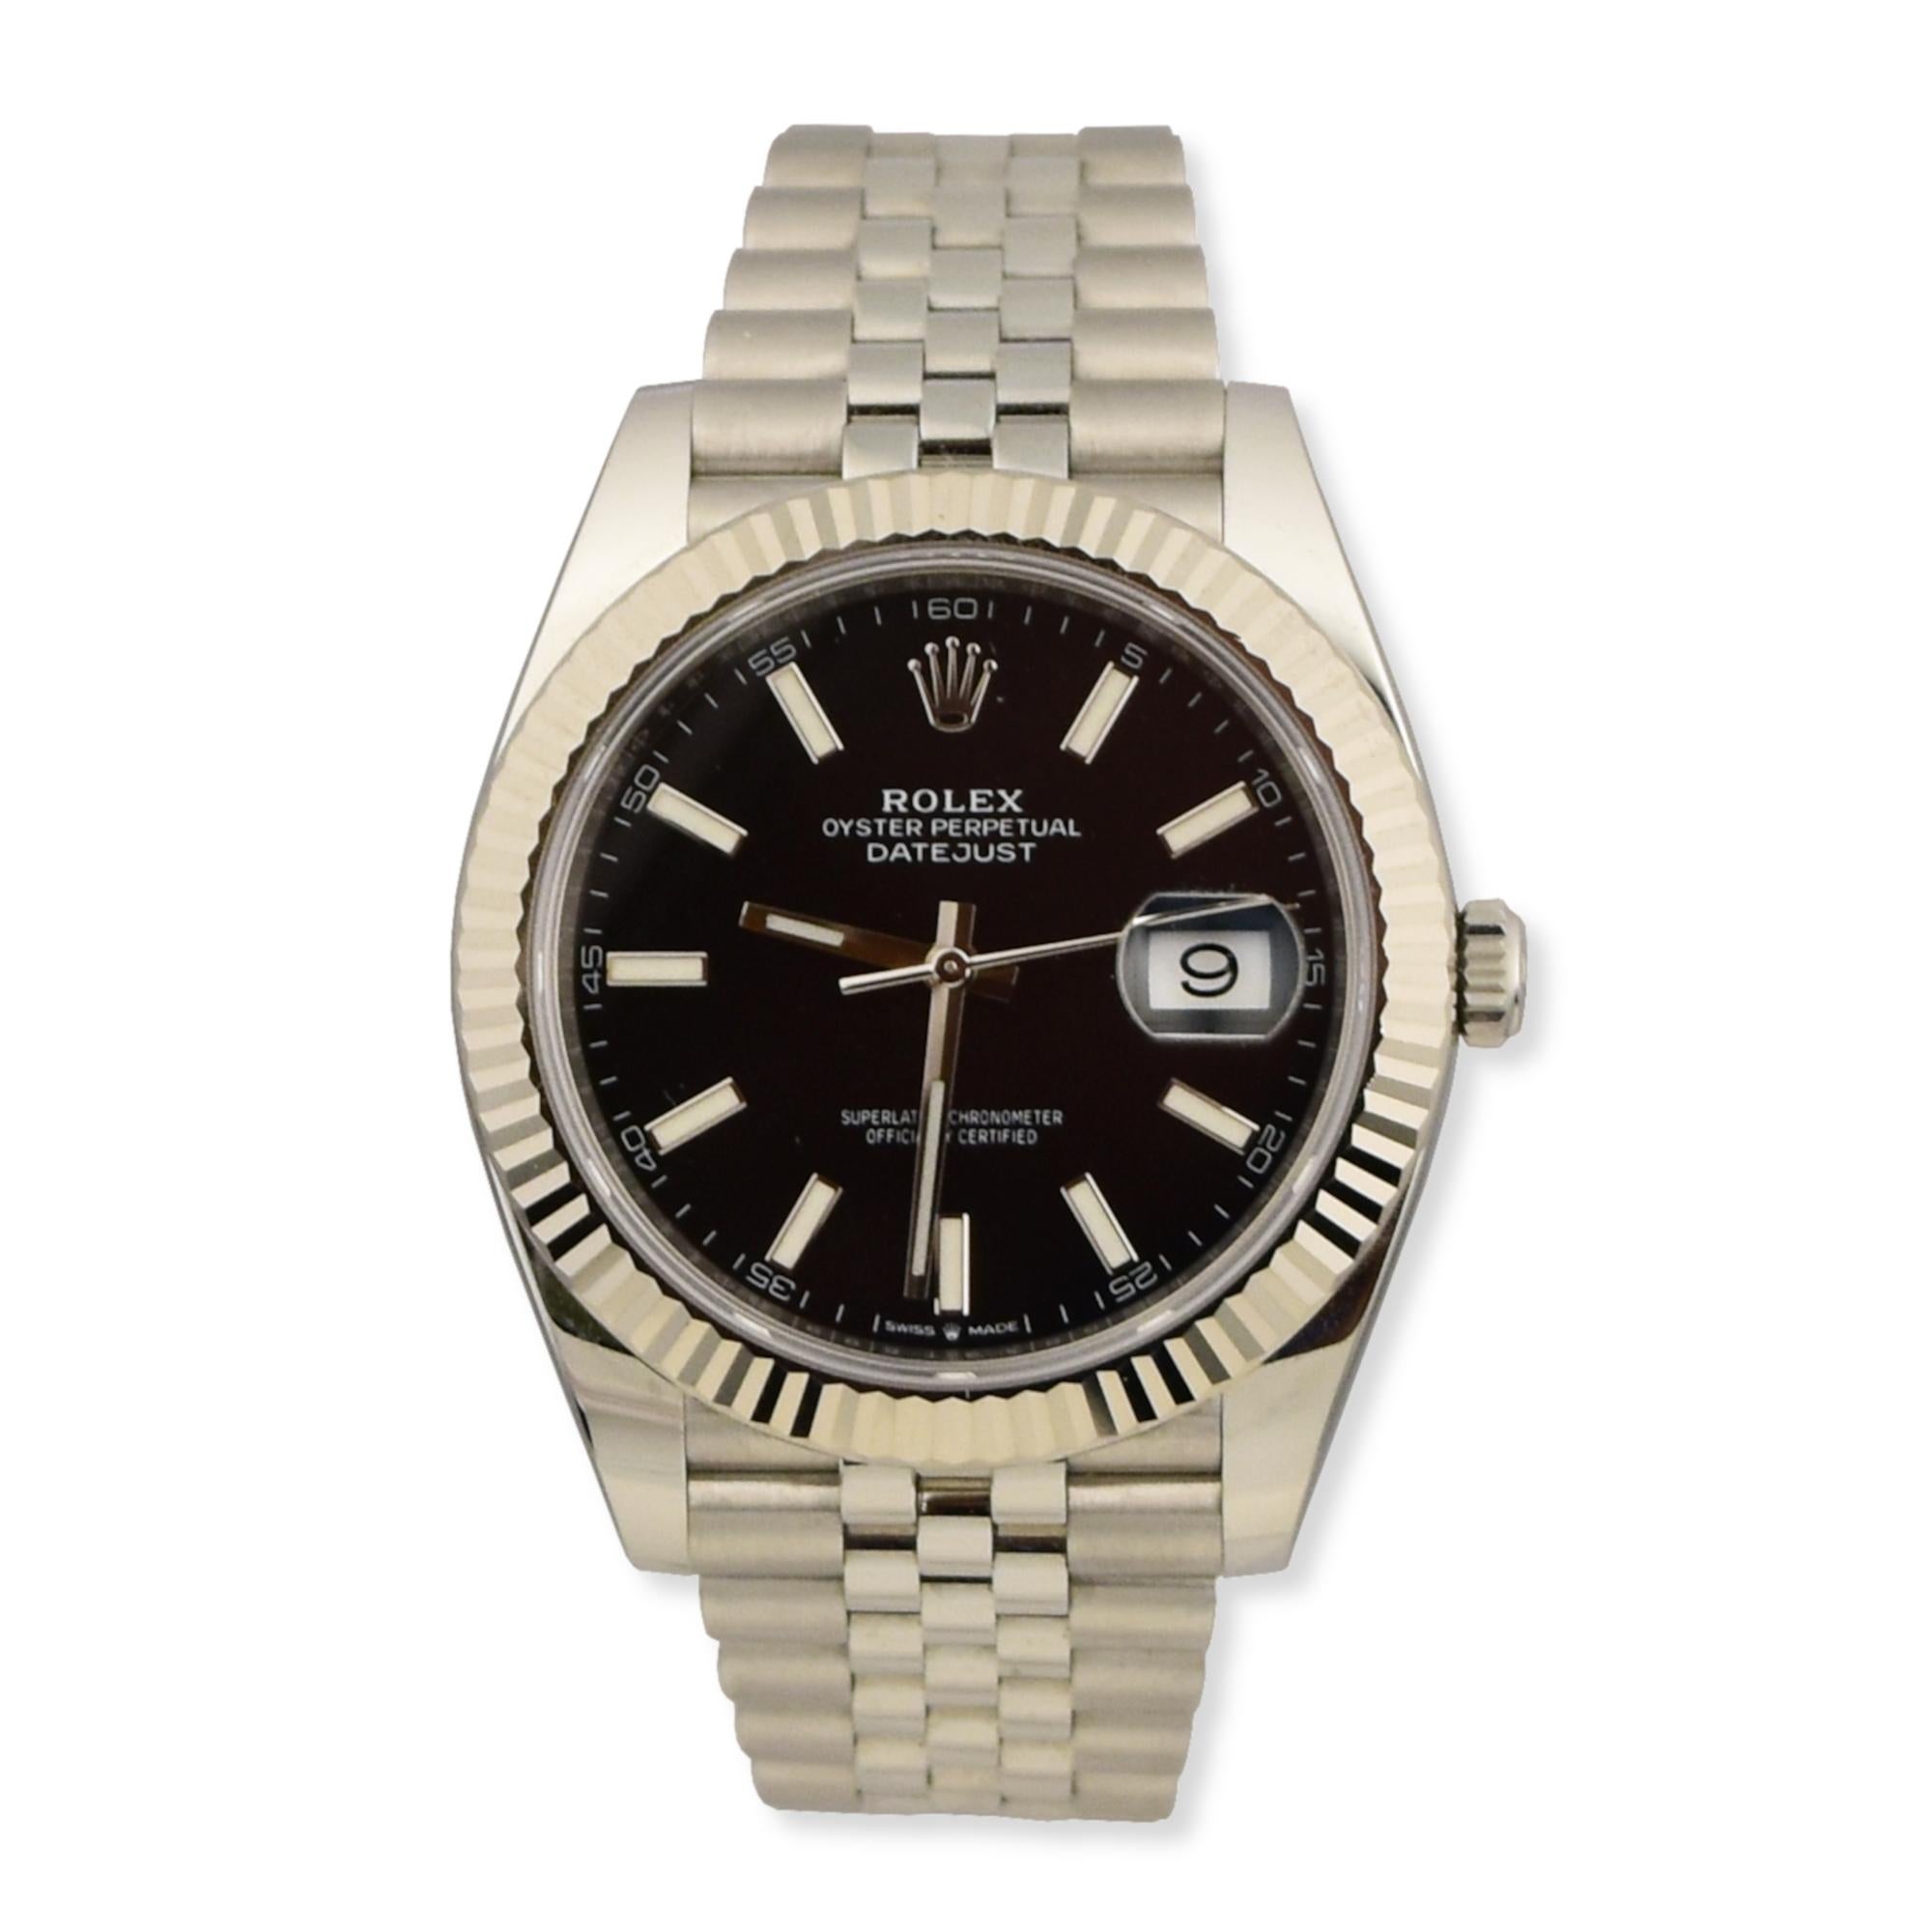 Brand: Rolex
Dial: Black
Case Size: 41mm
Water Resistance: 10ATM
Case Material: Stainless Steel
Bracelet Material: Stainless Steel
Bezel Material: White Gold
Bracelet Style: Jubilee 
The 126334 model Rolex Datejust 41 is formed predominantly in